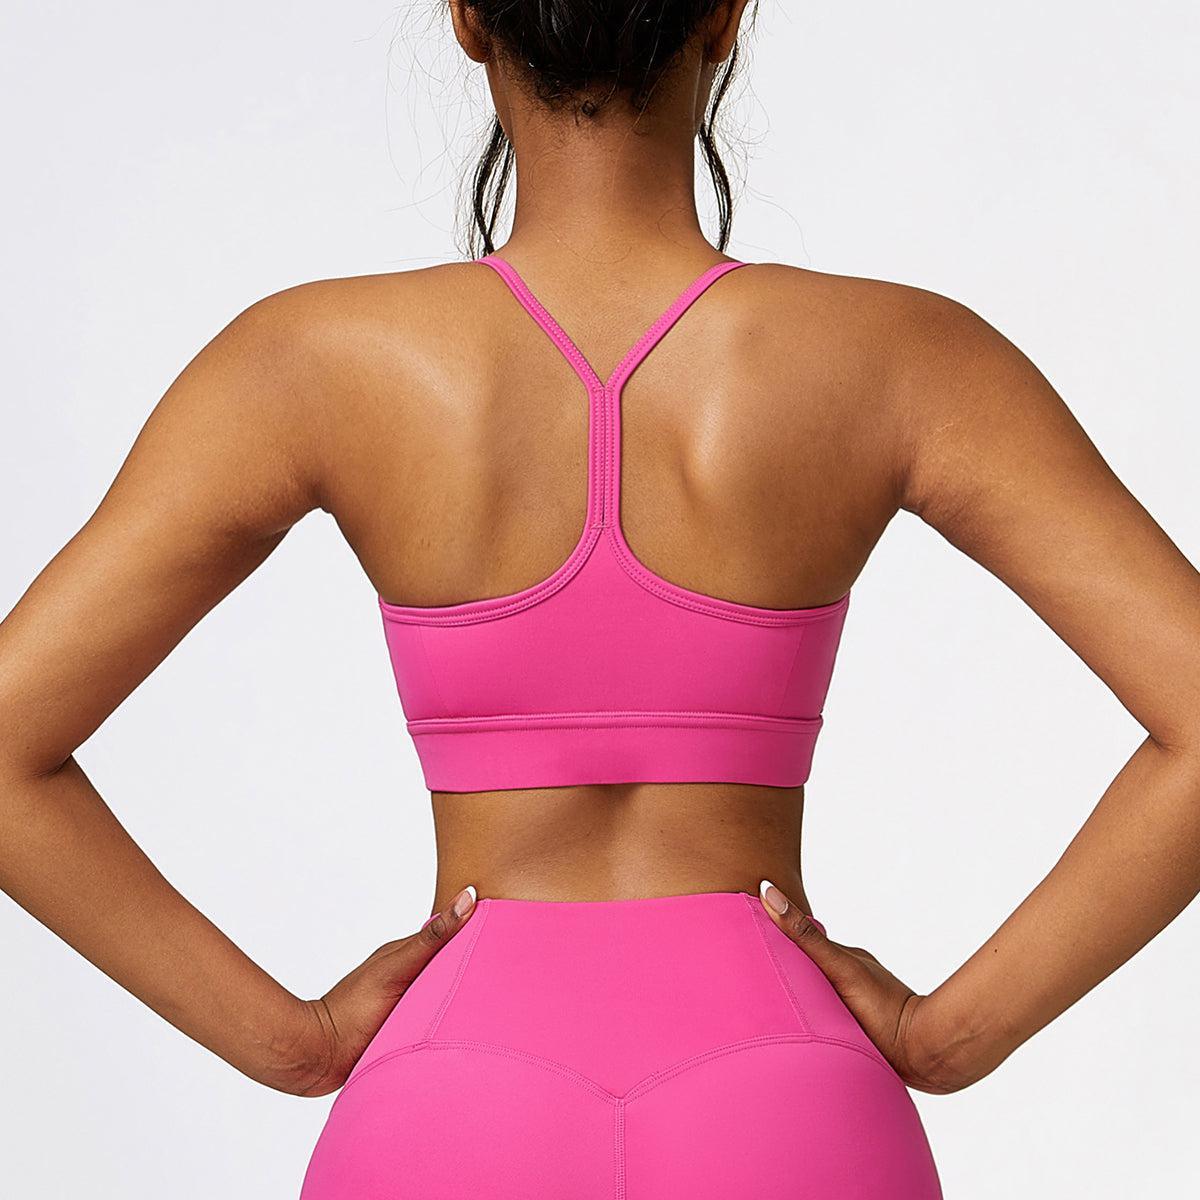 the back of a woman in a pink sports bra top